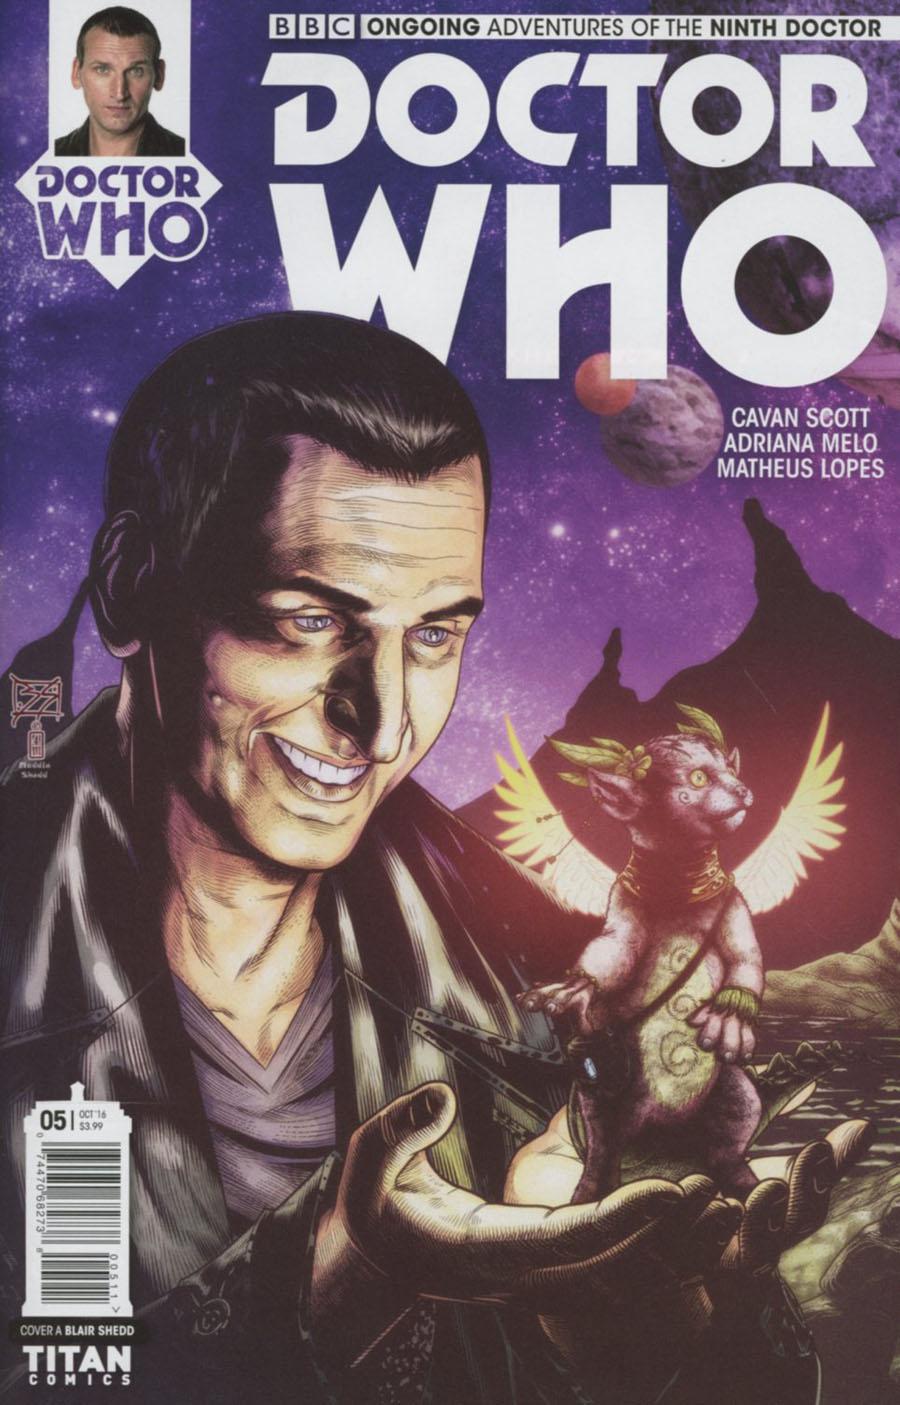 Doctor Who 9th Doctor Vol. 2 #5